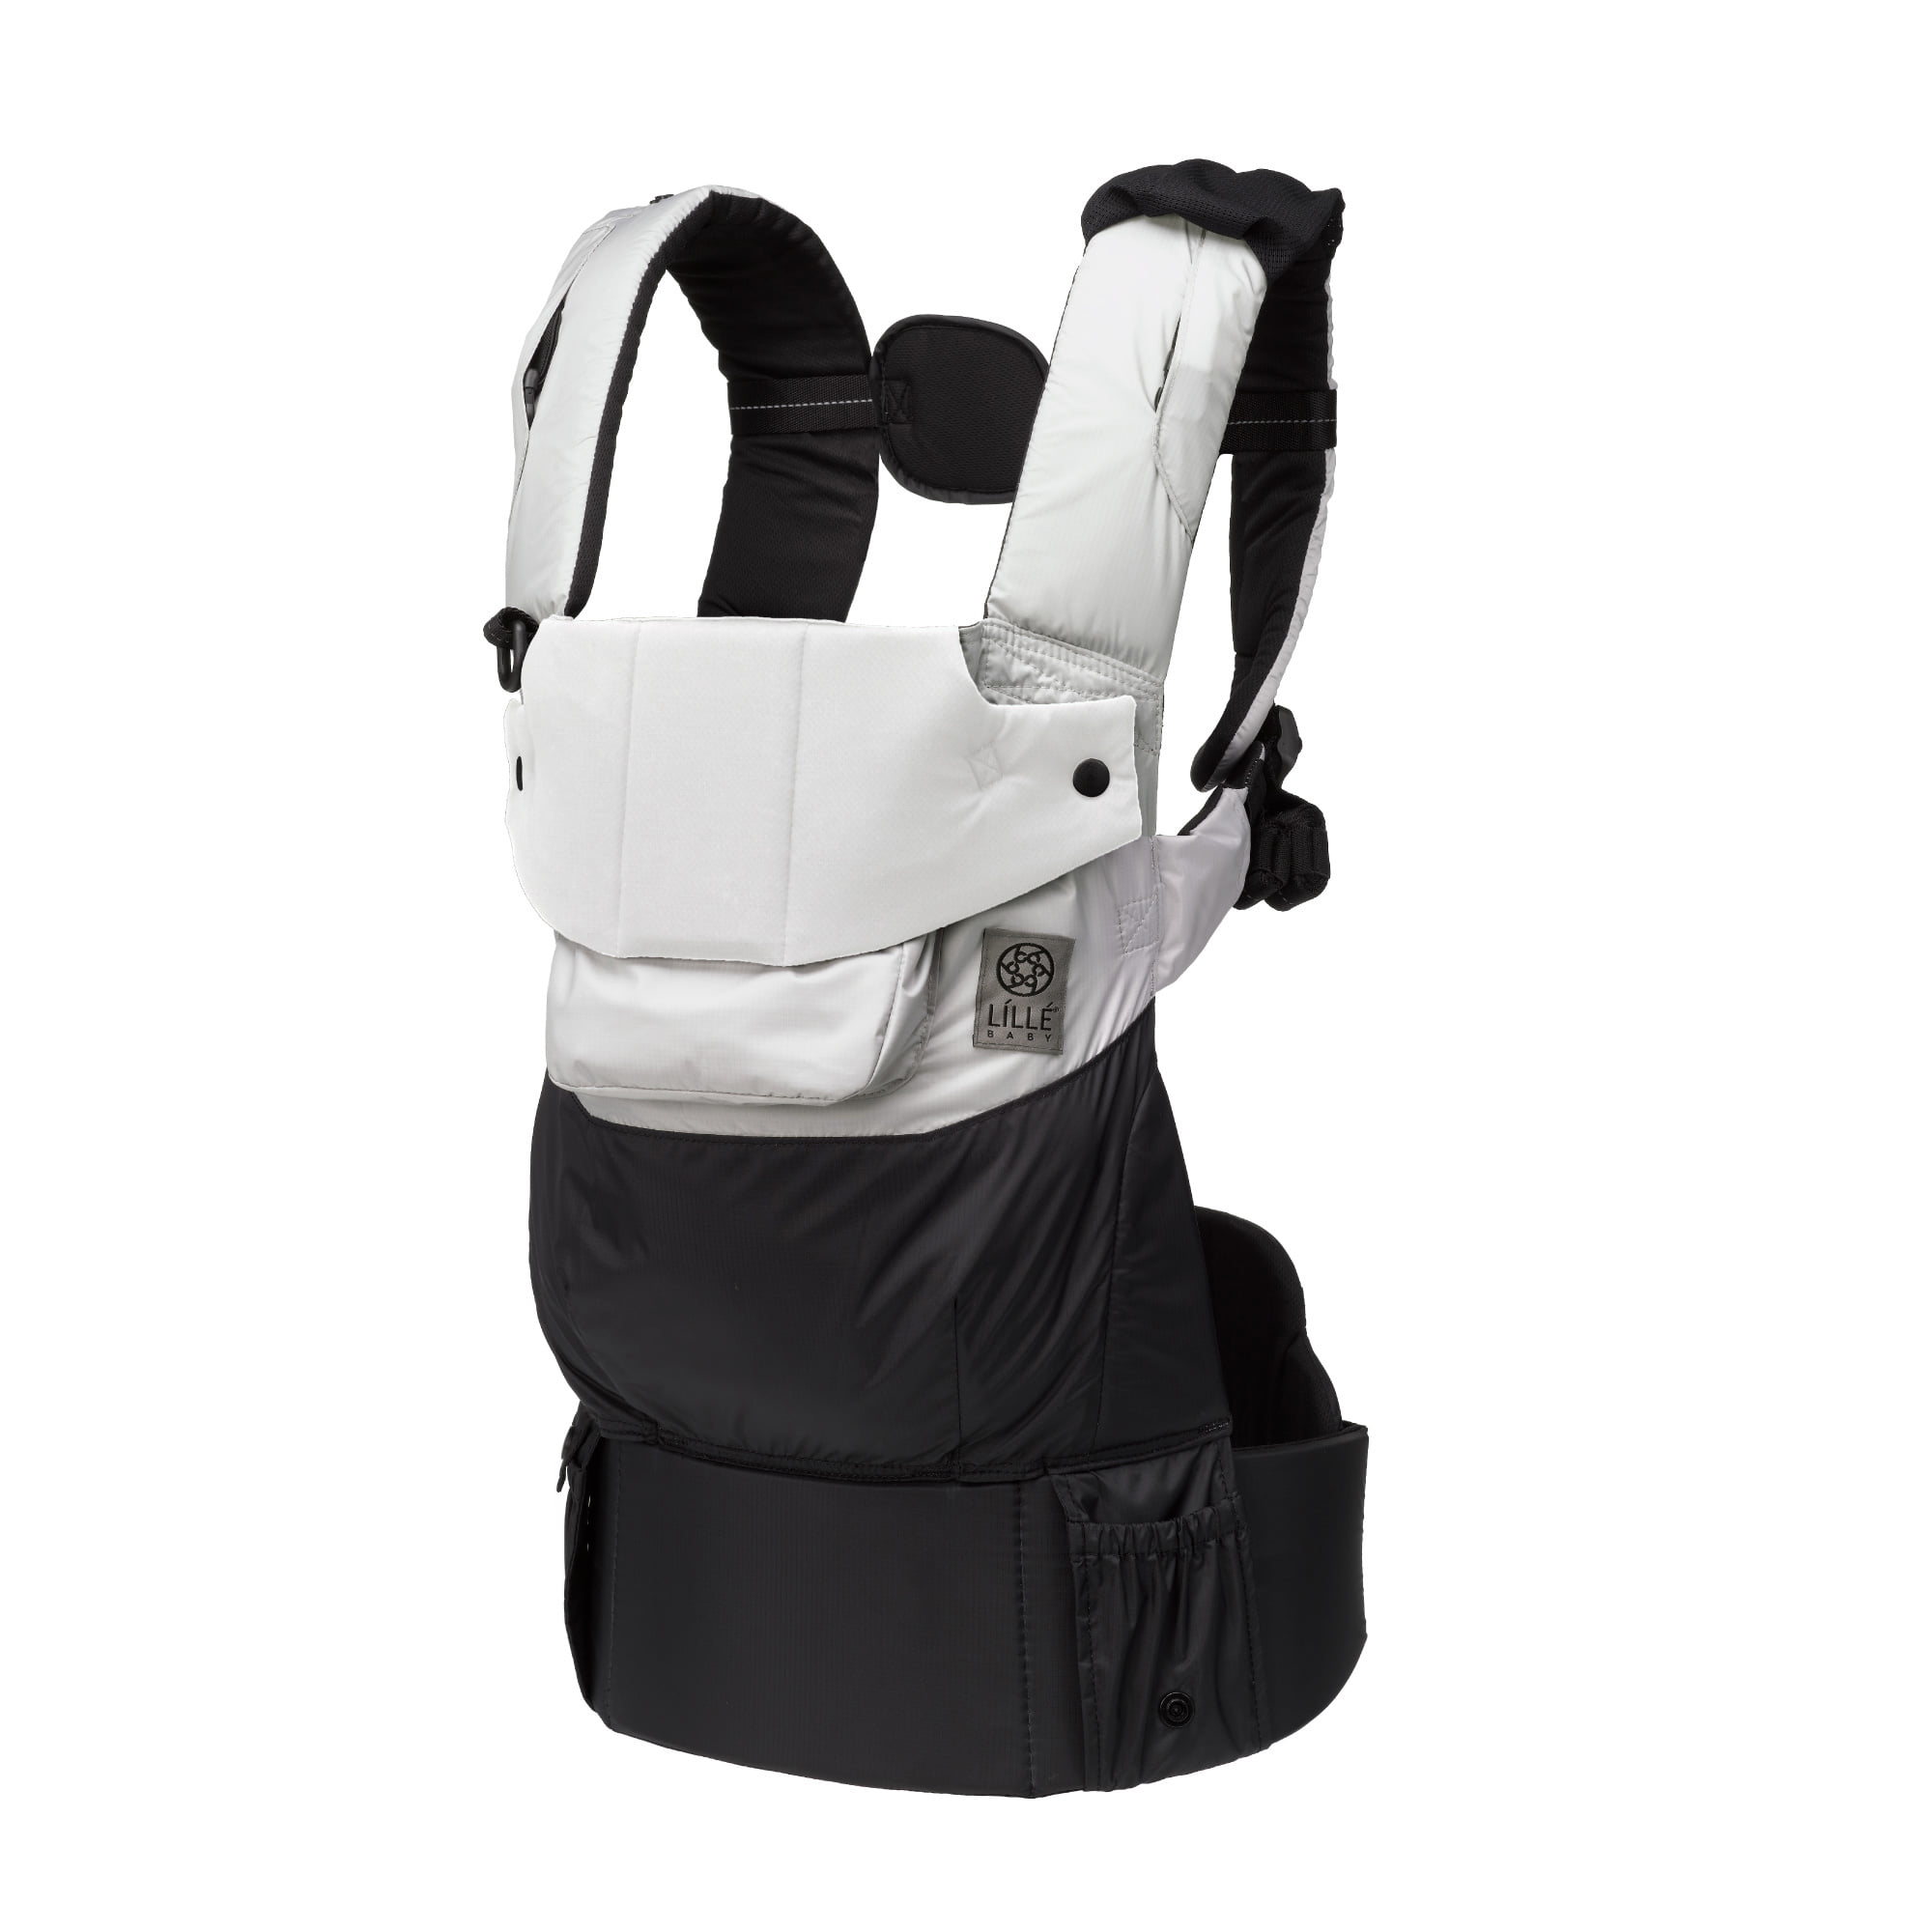 sport baby carrier